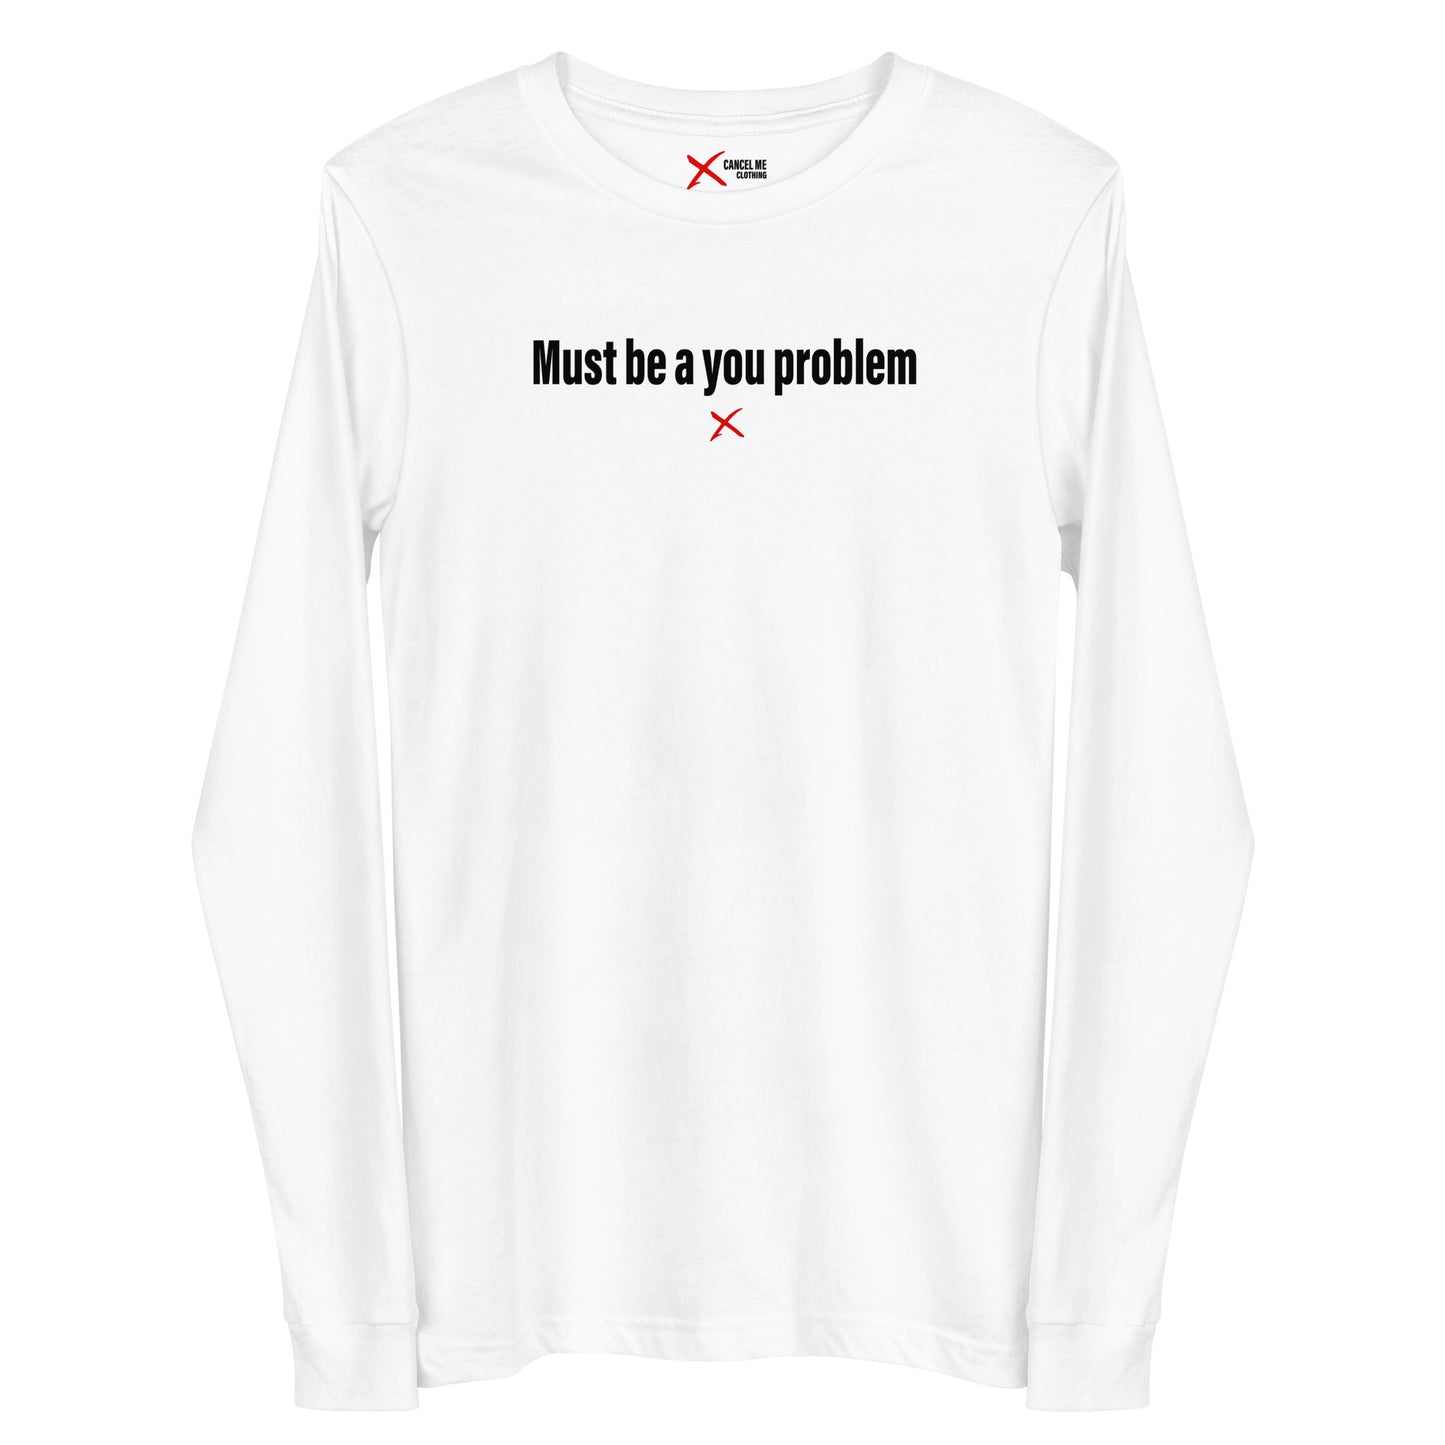 Must be a you problem - Longsleeve